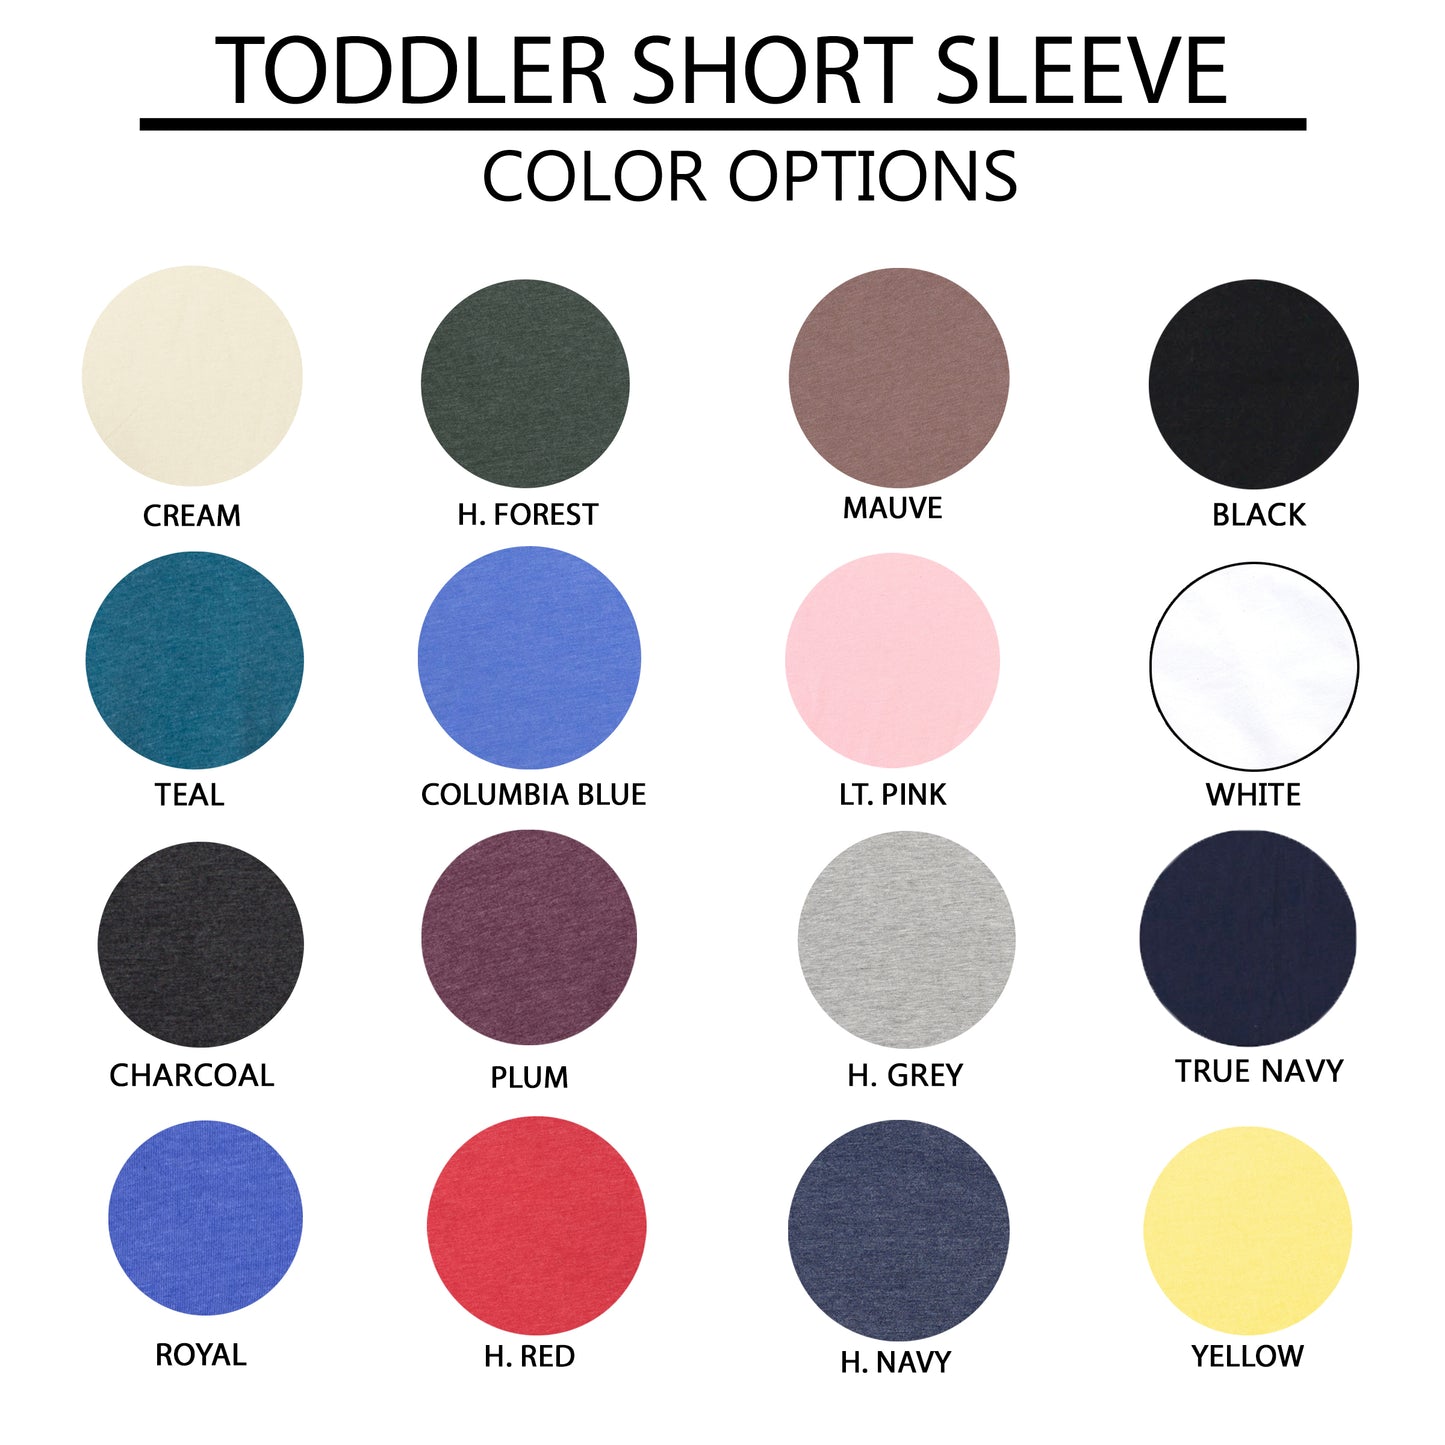 Born To Play | Toddler Short Sleeve Crew Neck